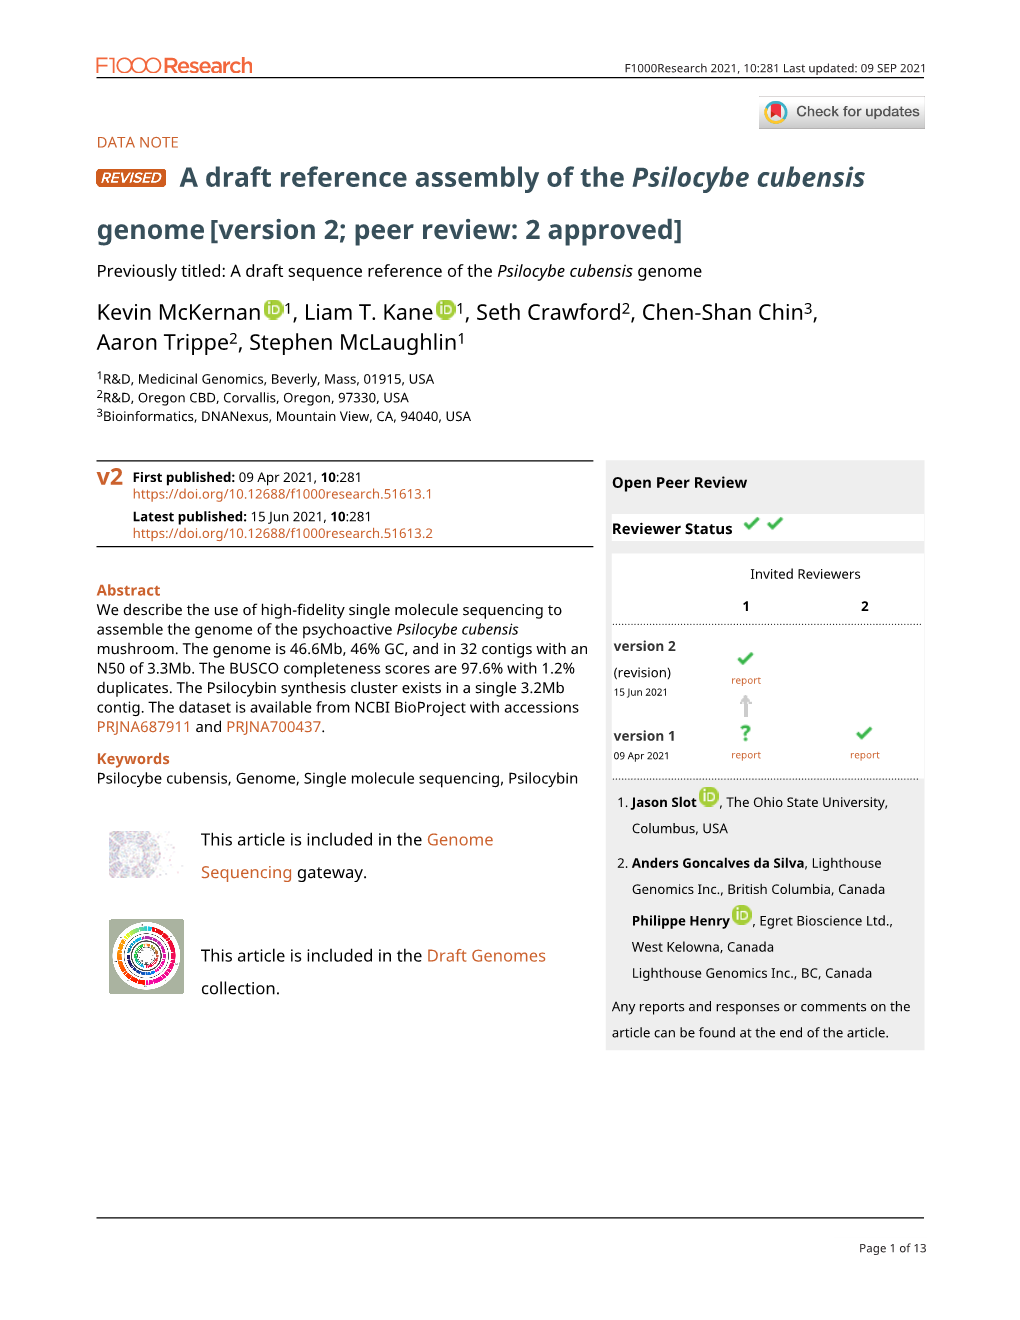 A Draft Reference Assembly of the Psilocybe Cubensis Genome [Version 2; Peer Review: 2 Approved]